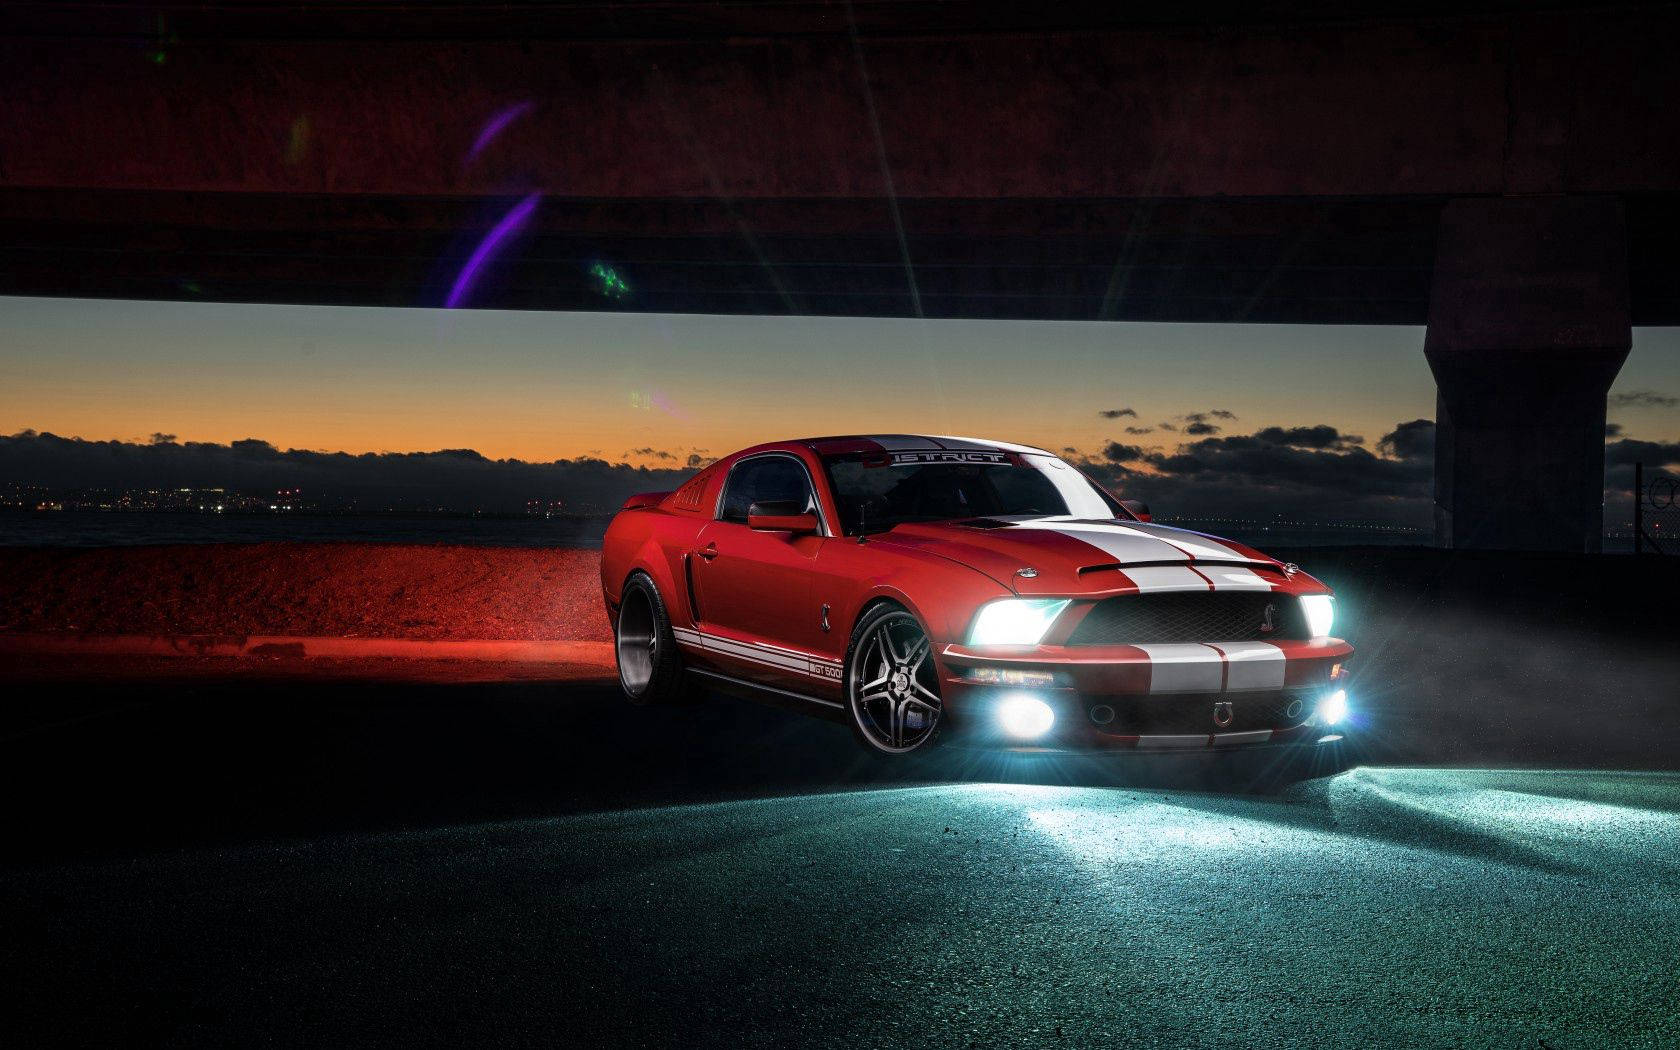 Under The Bridge Ford Shelby Mustang Background